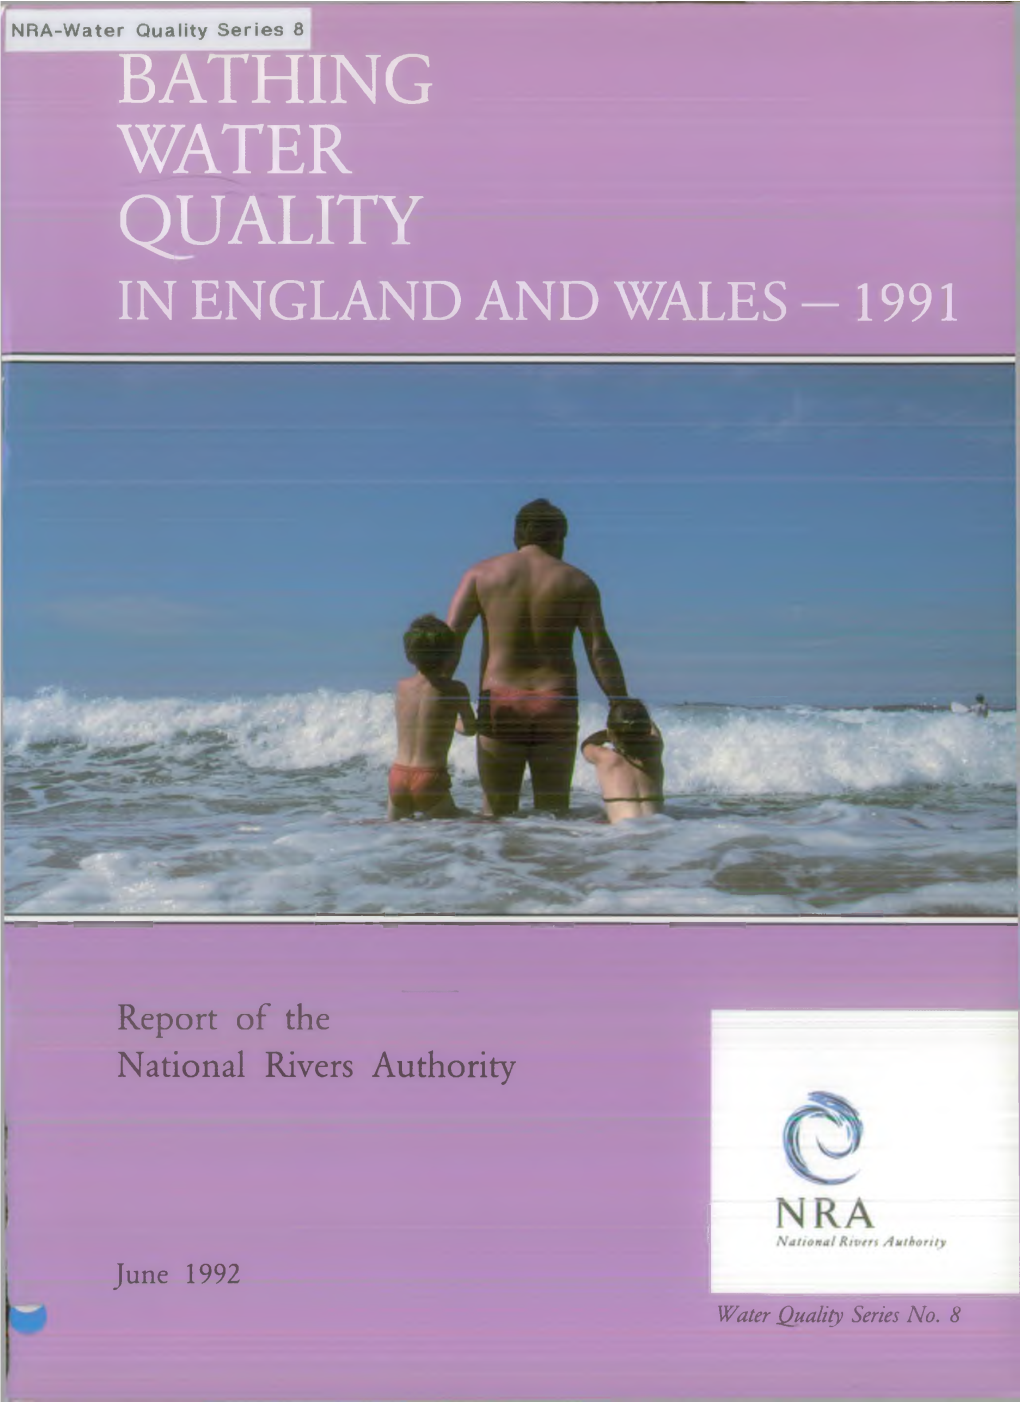 Bathing Water Quality in England and Wales -1991